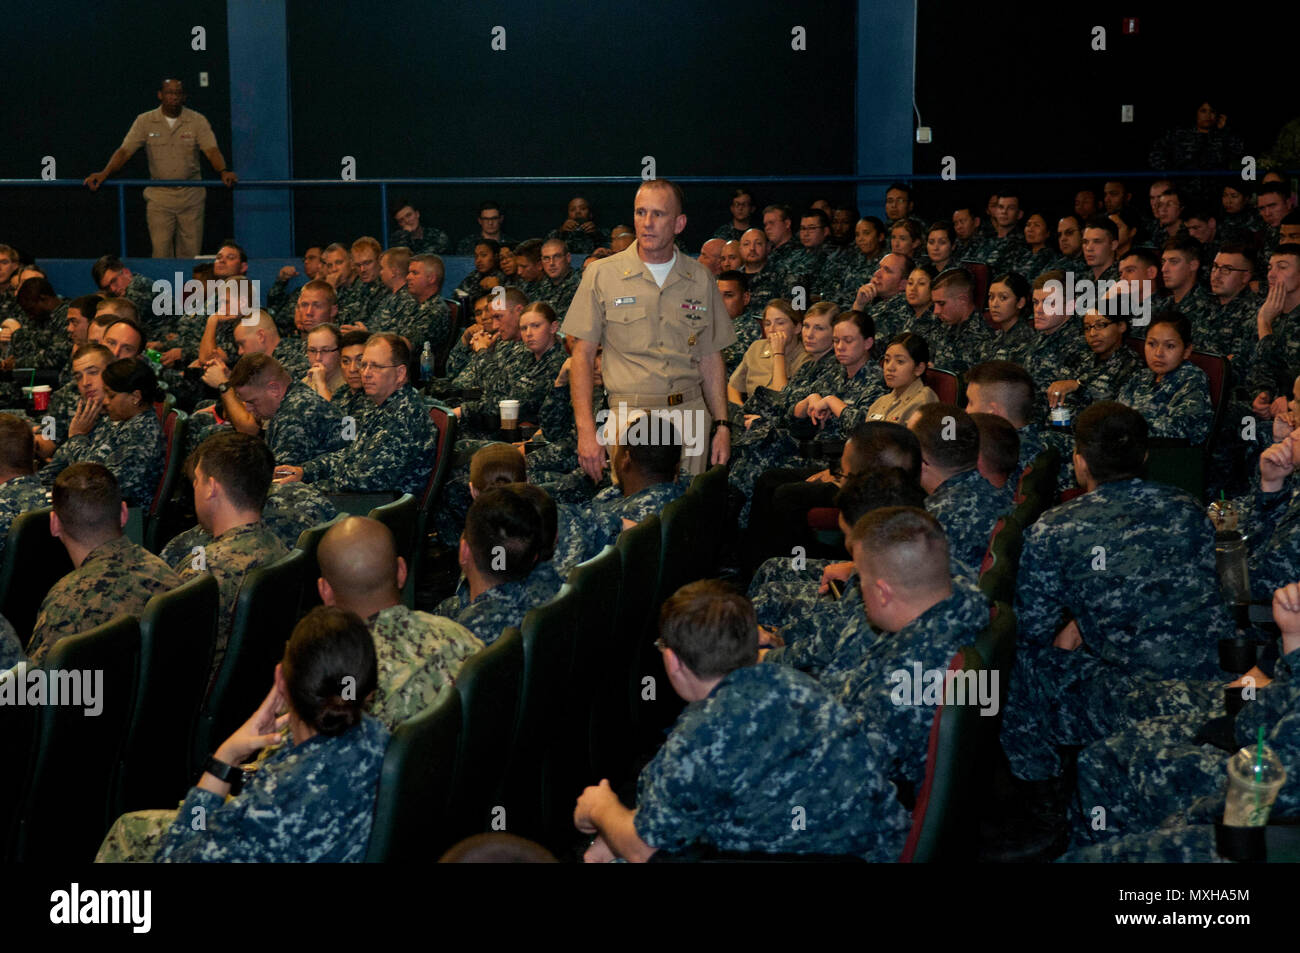 161108-N-ZF498-085 SAN DIEGO (Nov. 8, 2016) The 14th Master Chief Petty Officer of the Navy (MCPON) Steven Giordano speaks with Sailors during an all-hands call at Naval Base San Diego. MCPON addressed current issues in the Navy and participated in a question-and-answer session with Sailors. This is Giordano's first visit to Naval Base San Diego since taking office as the 14th MCPON.  (U.S. Navy photo by Petty Officer 3rd Class Anthony N. Hilkowski/Released) Stock Photo